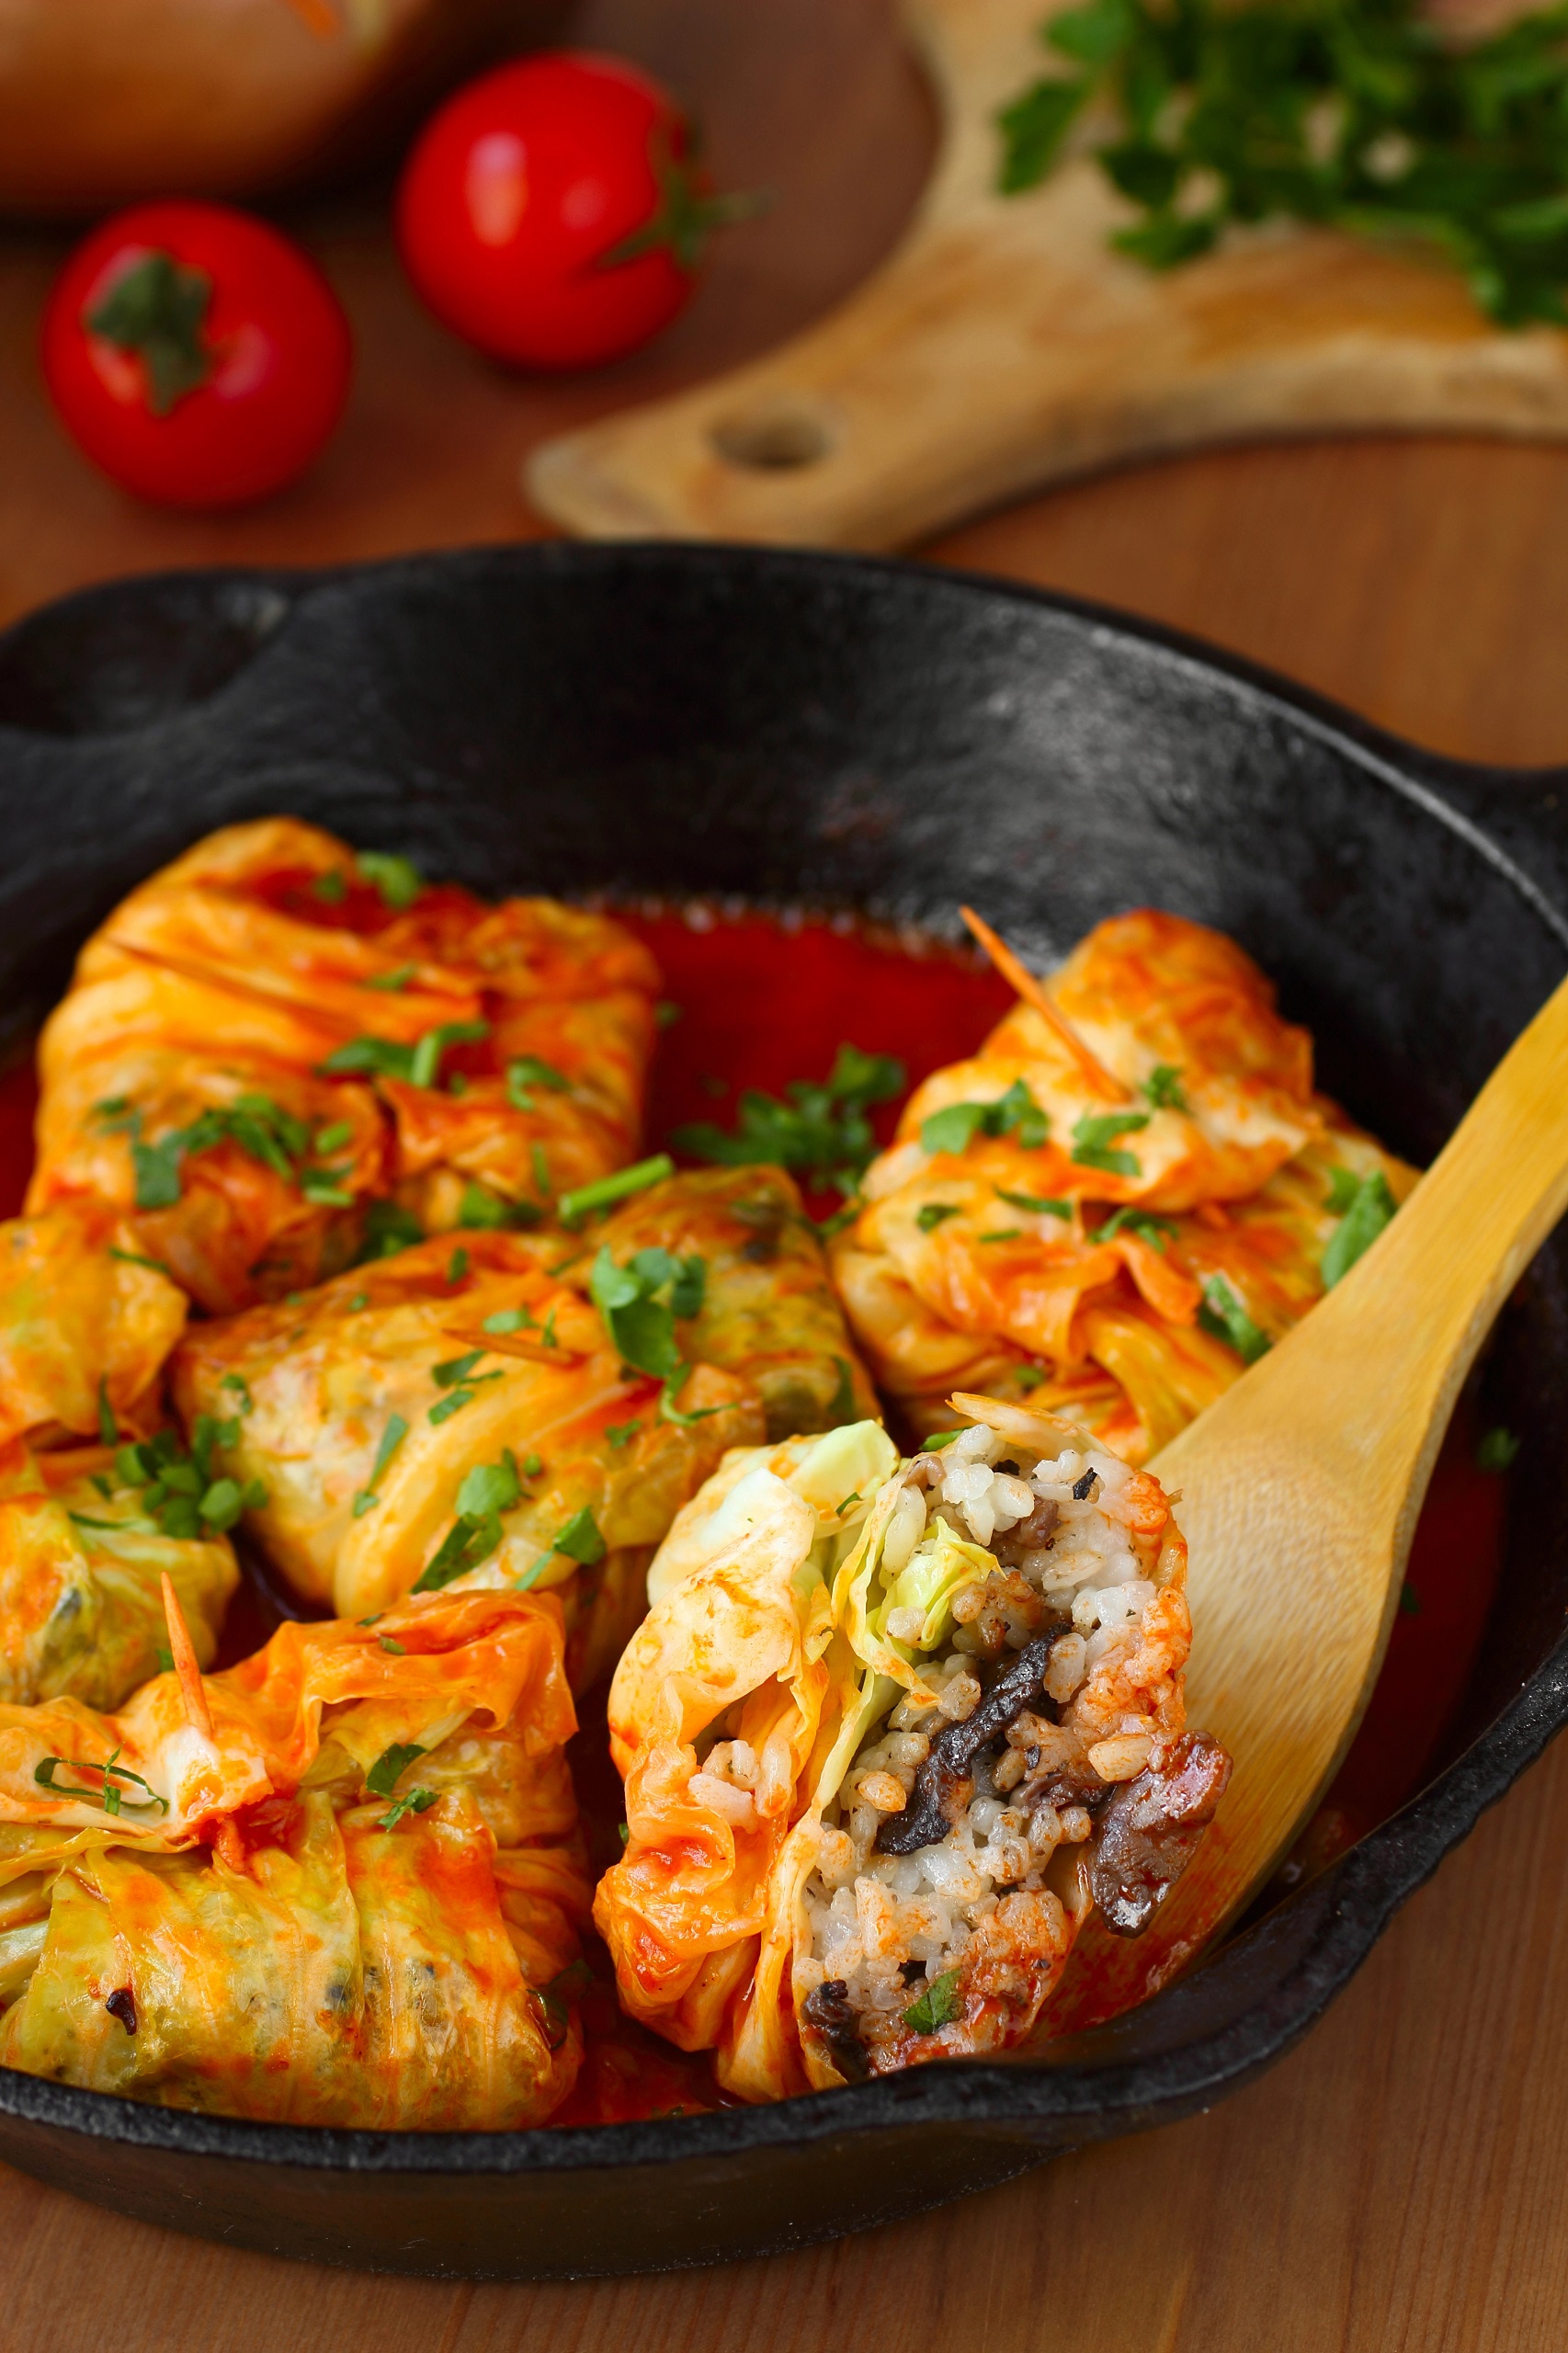 Polish gołąbkis stuffed with mushrooms, herbs and rice each rolled in a cooked cabbage leaf garnished with parsley just made in an iron skillet still simmering in their tomato juices.